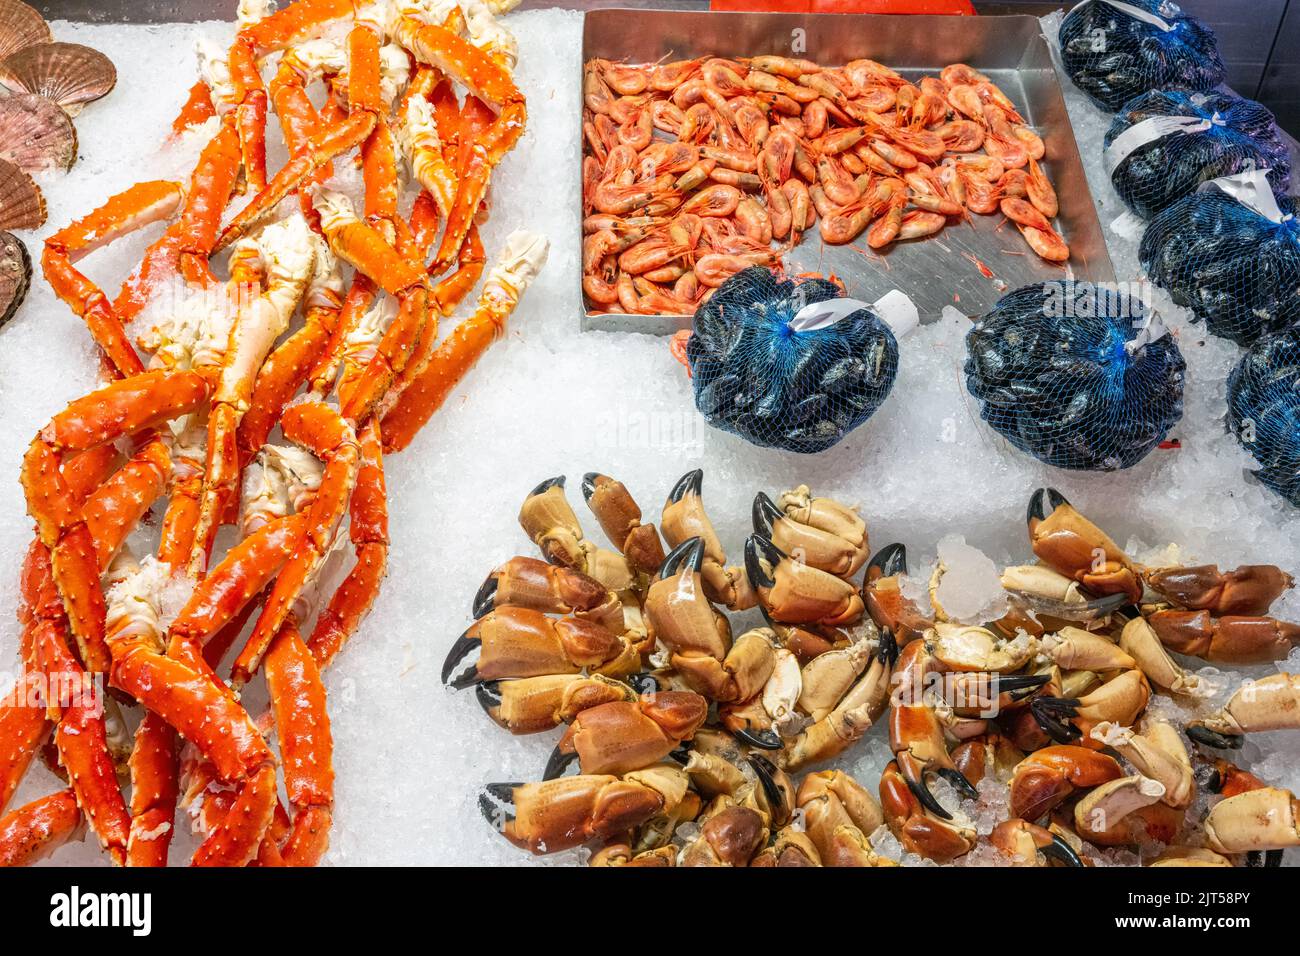 Prawns, clams and crabs for sale at a market in Bergen, Norway Stock Photo